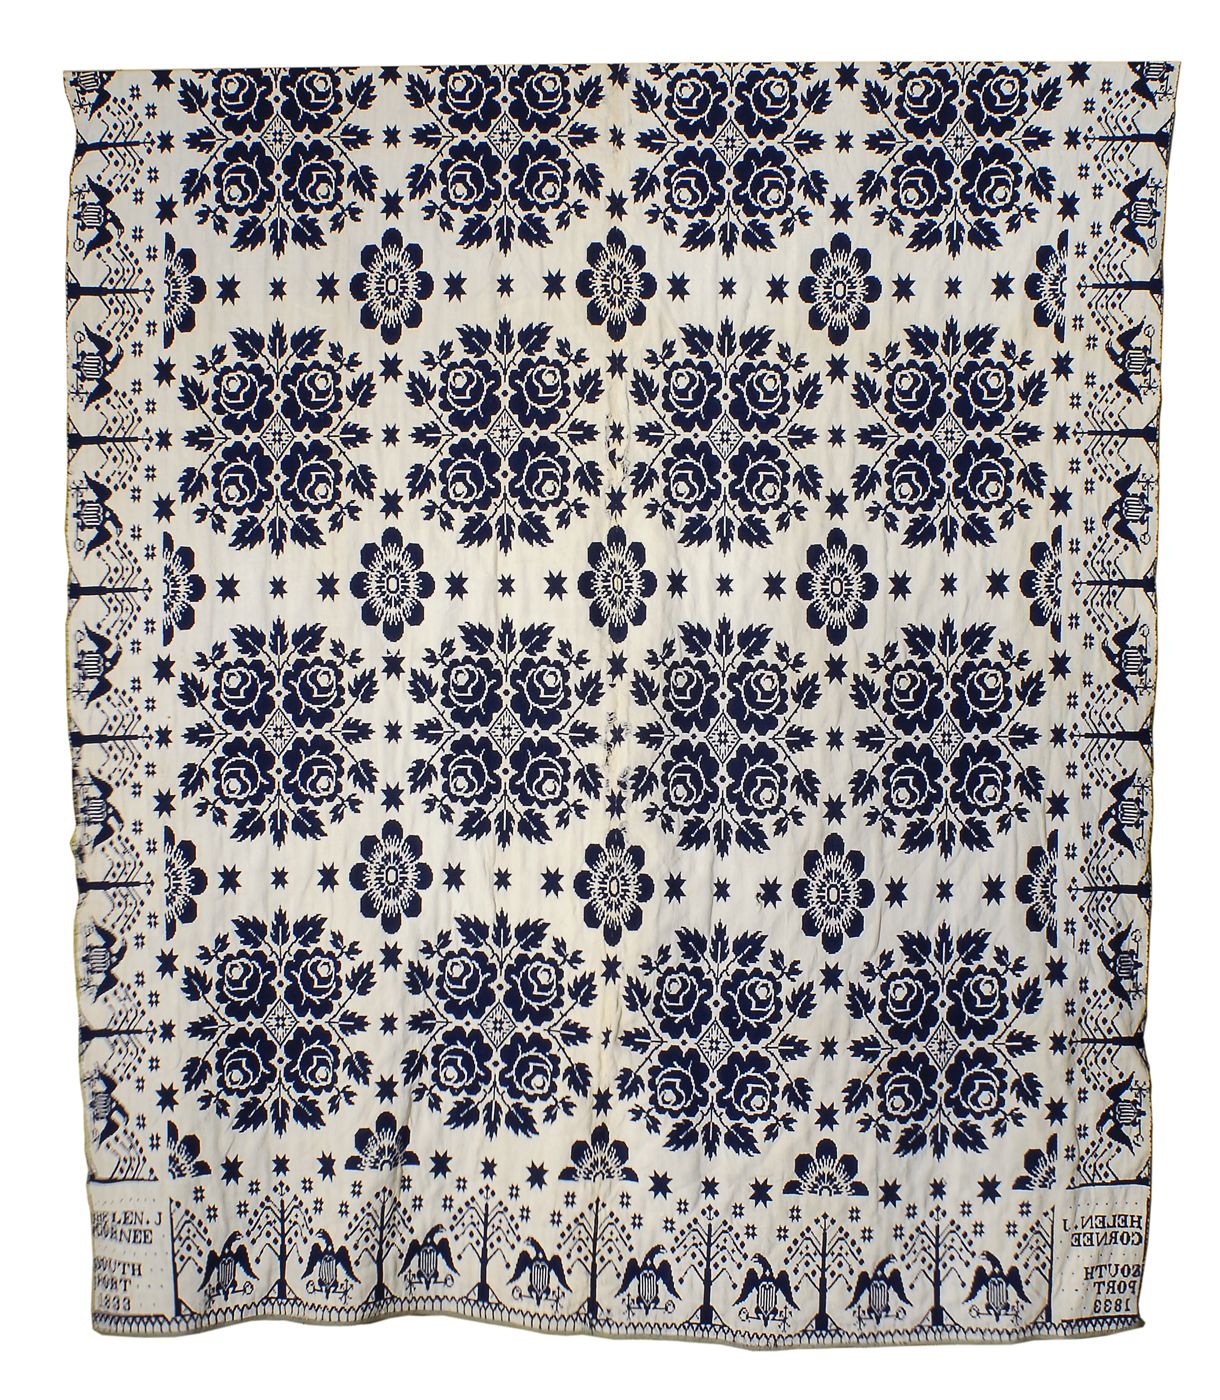 BLUE AND WHITE JACQUARD COVERLET19th 14a937